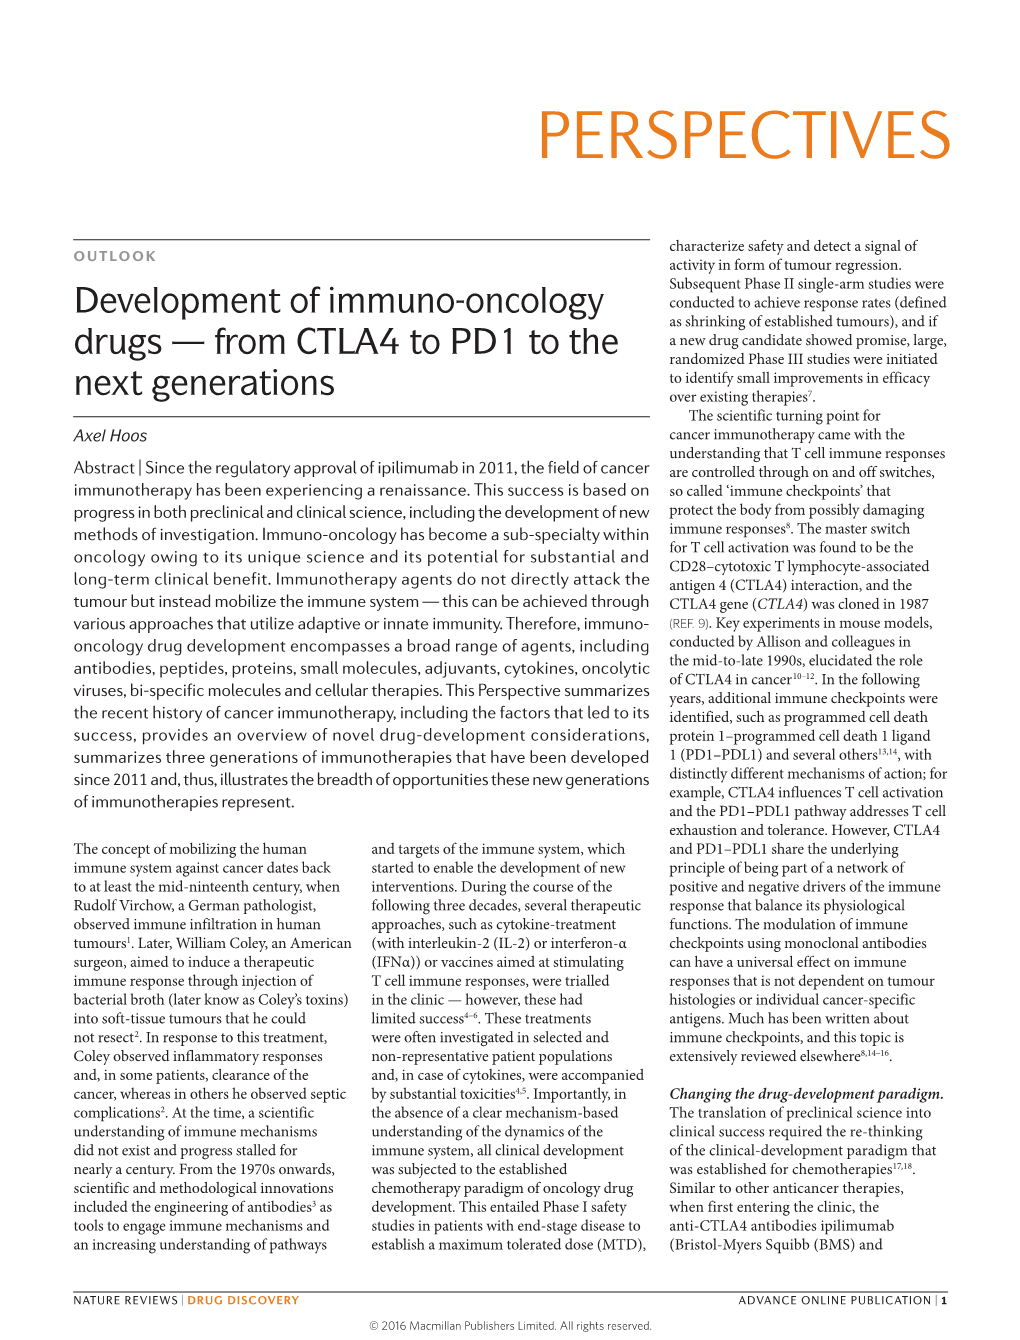 Development of Immuno-Oncology Drugs — from CTLA4 to PD1 to The